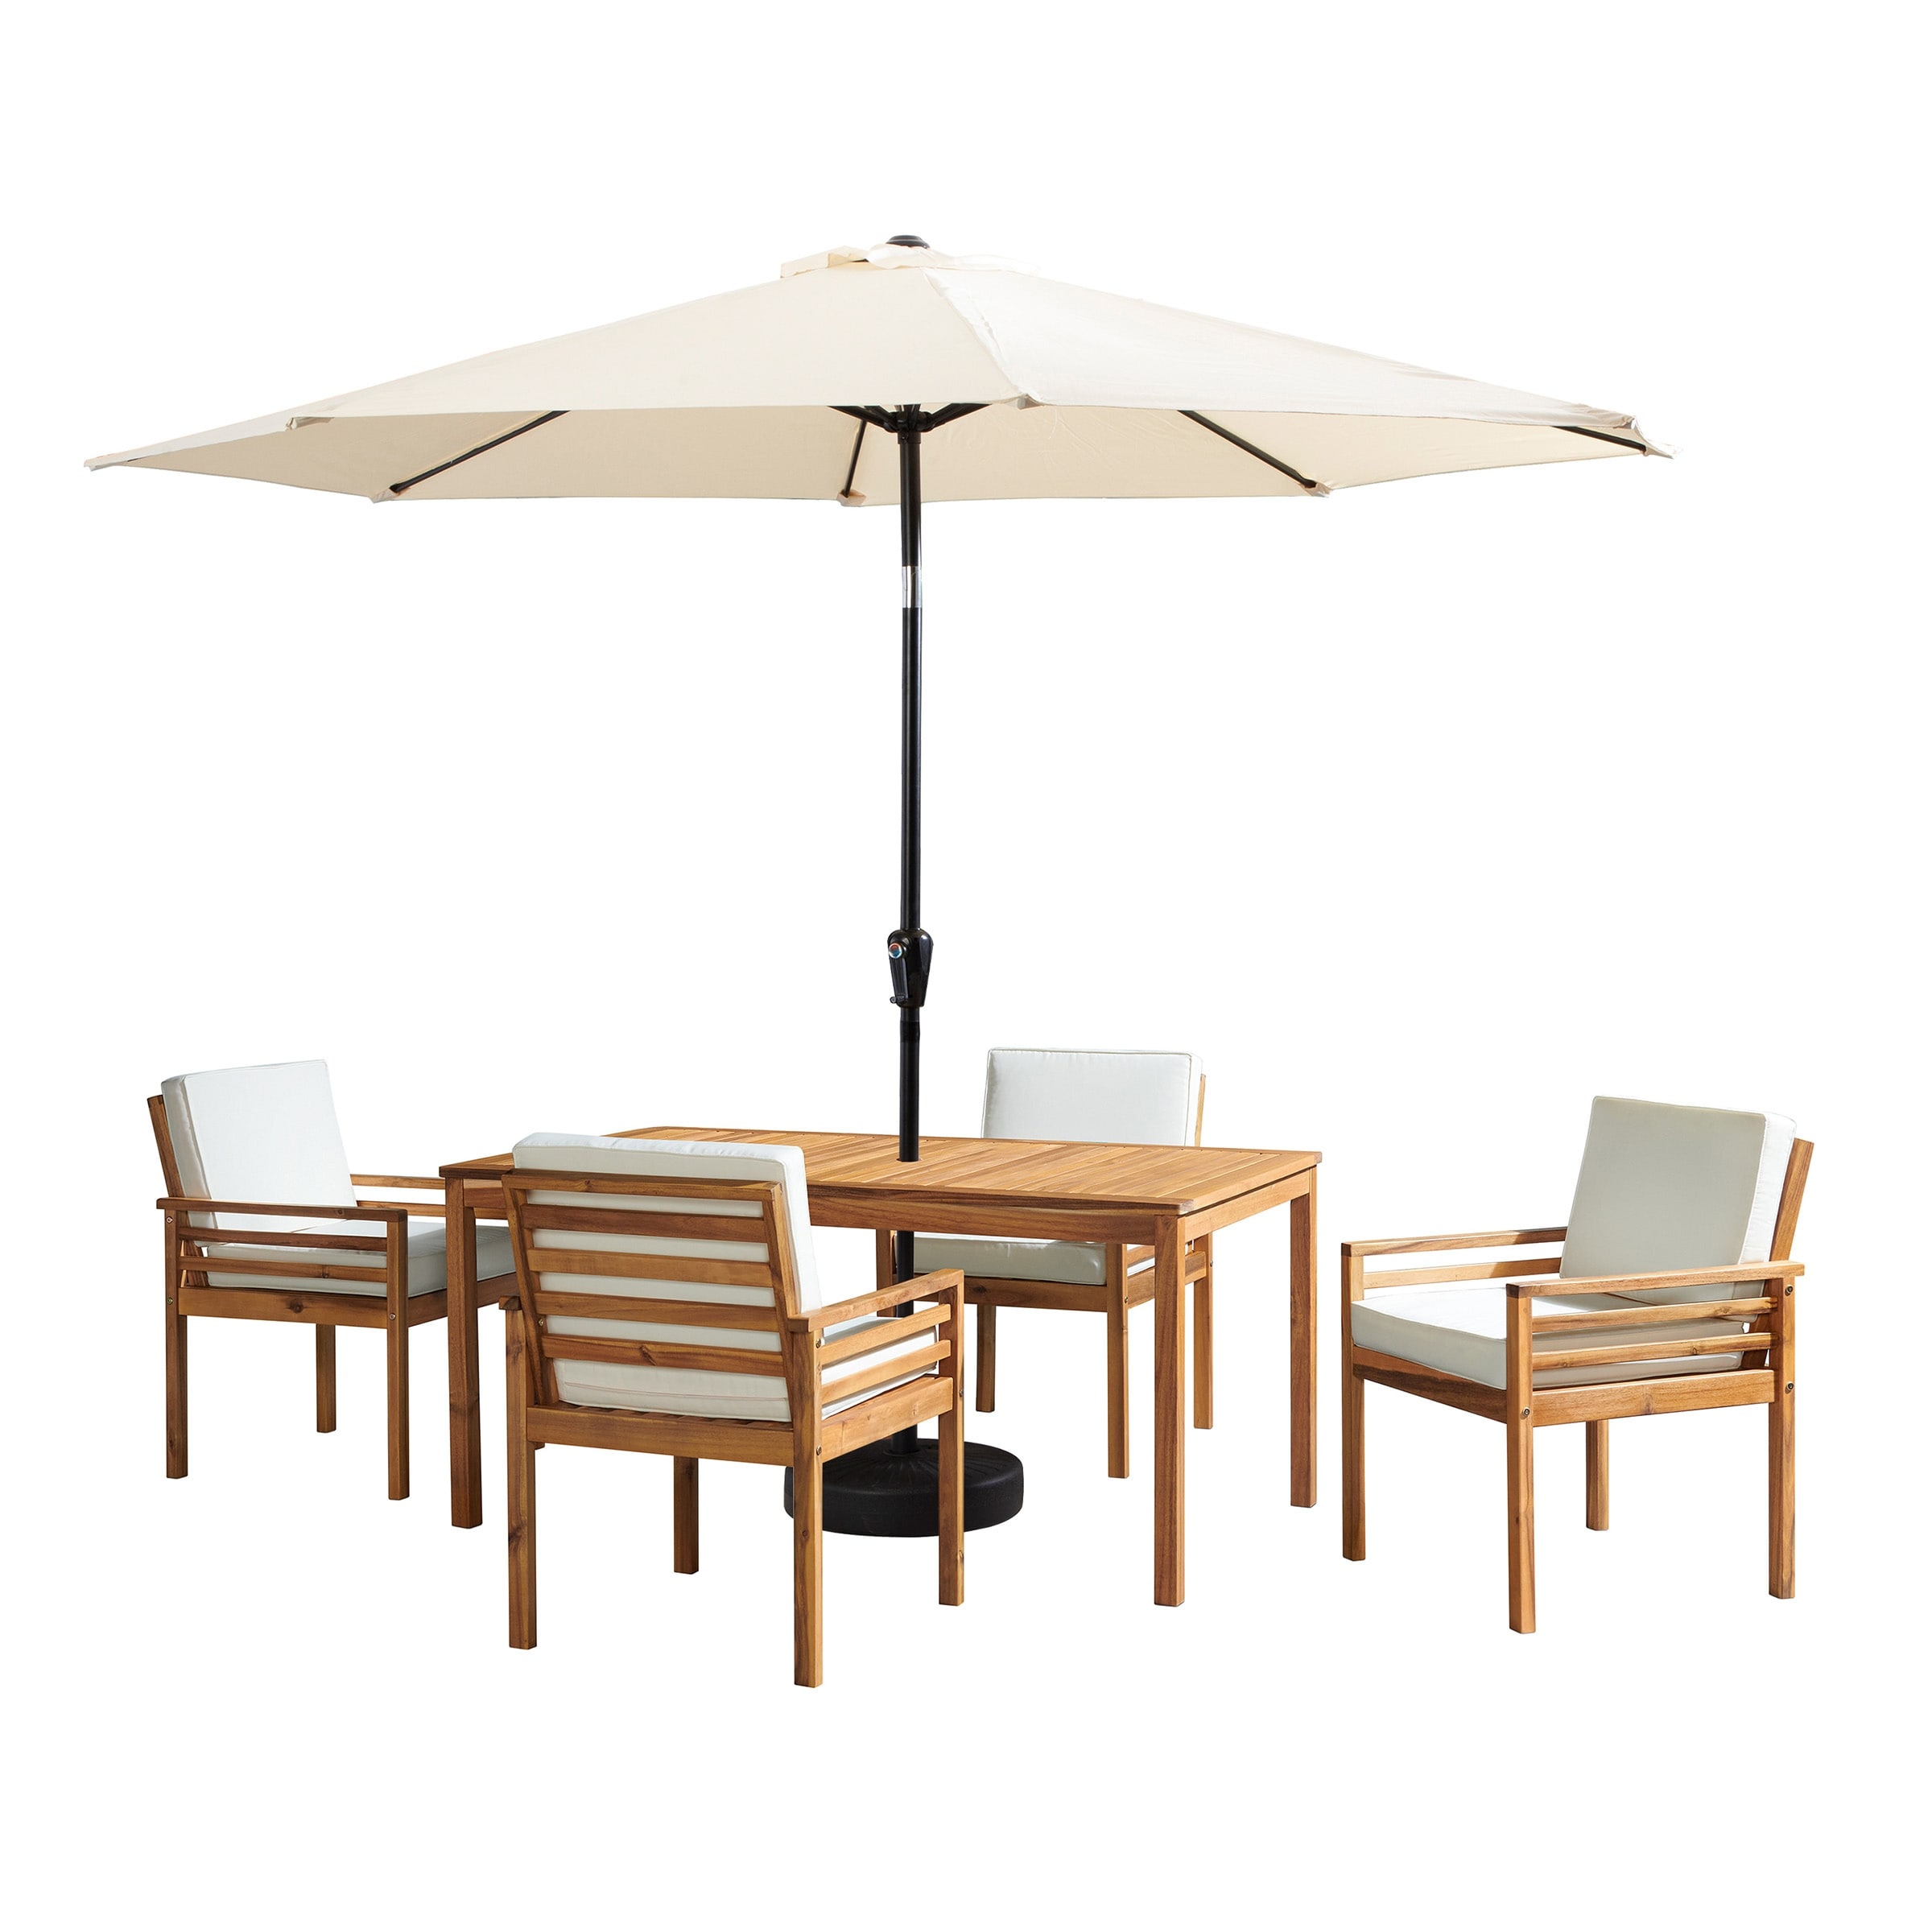 Okemo Table With 4 Chairs And 10-foot Auto Tilt Umbrella - 6 Piece Set - N/a